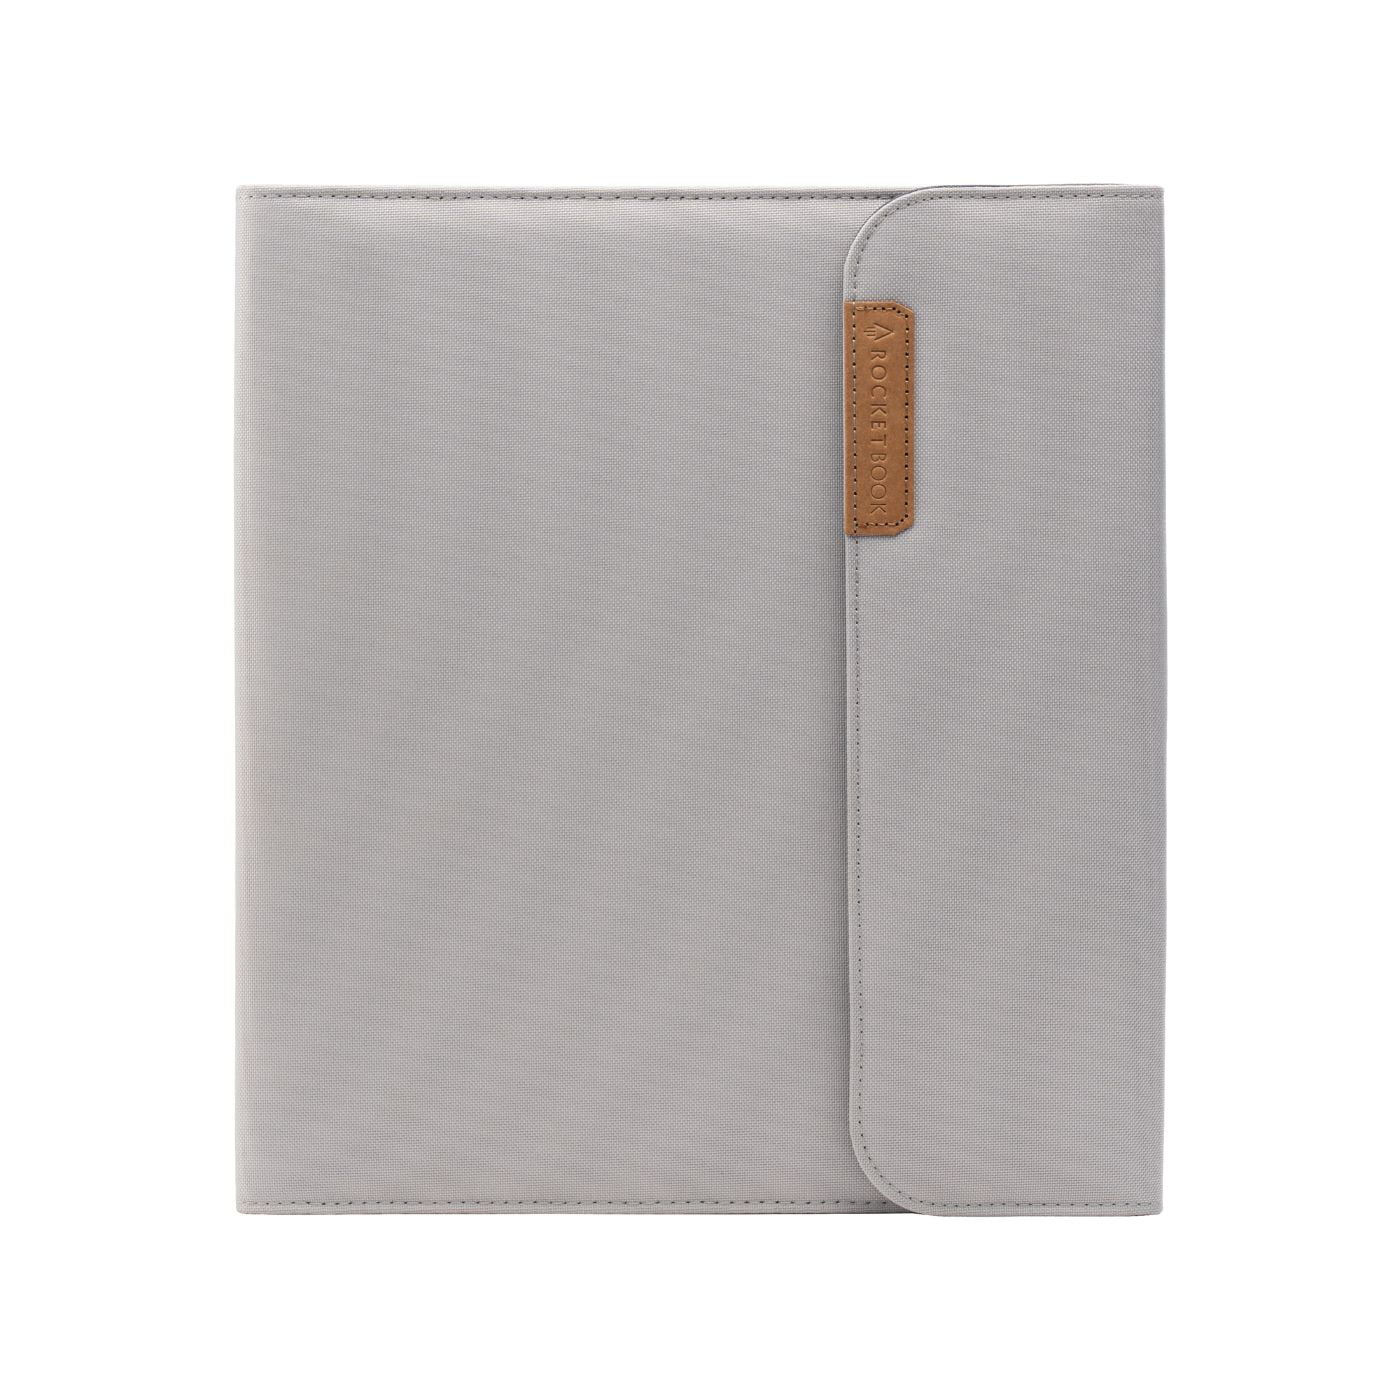 NEW Rocketbook CAPSULE Fits Core Fusion & Planner Protector